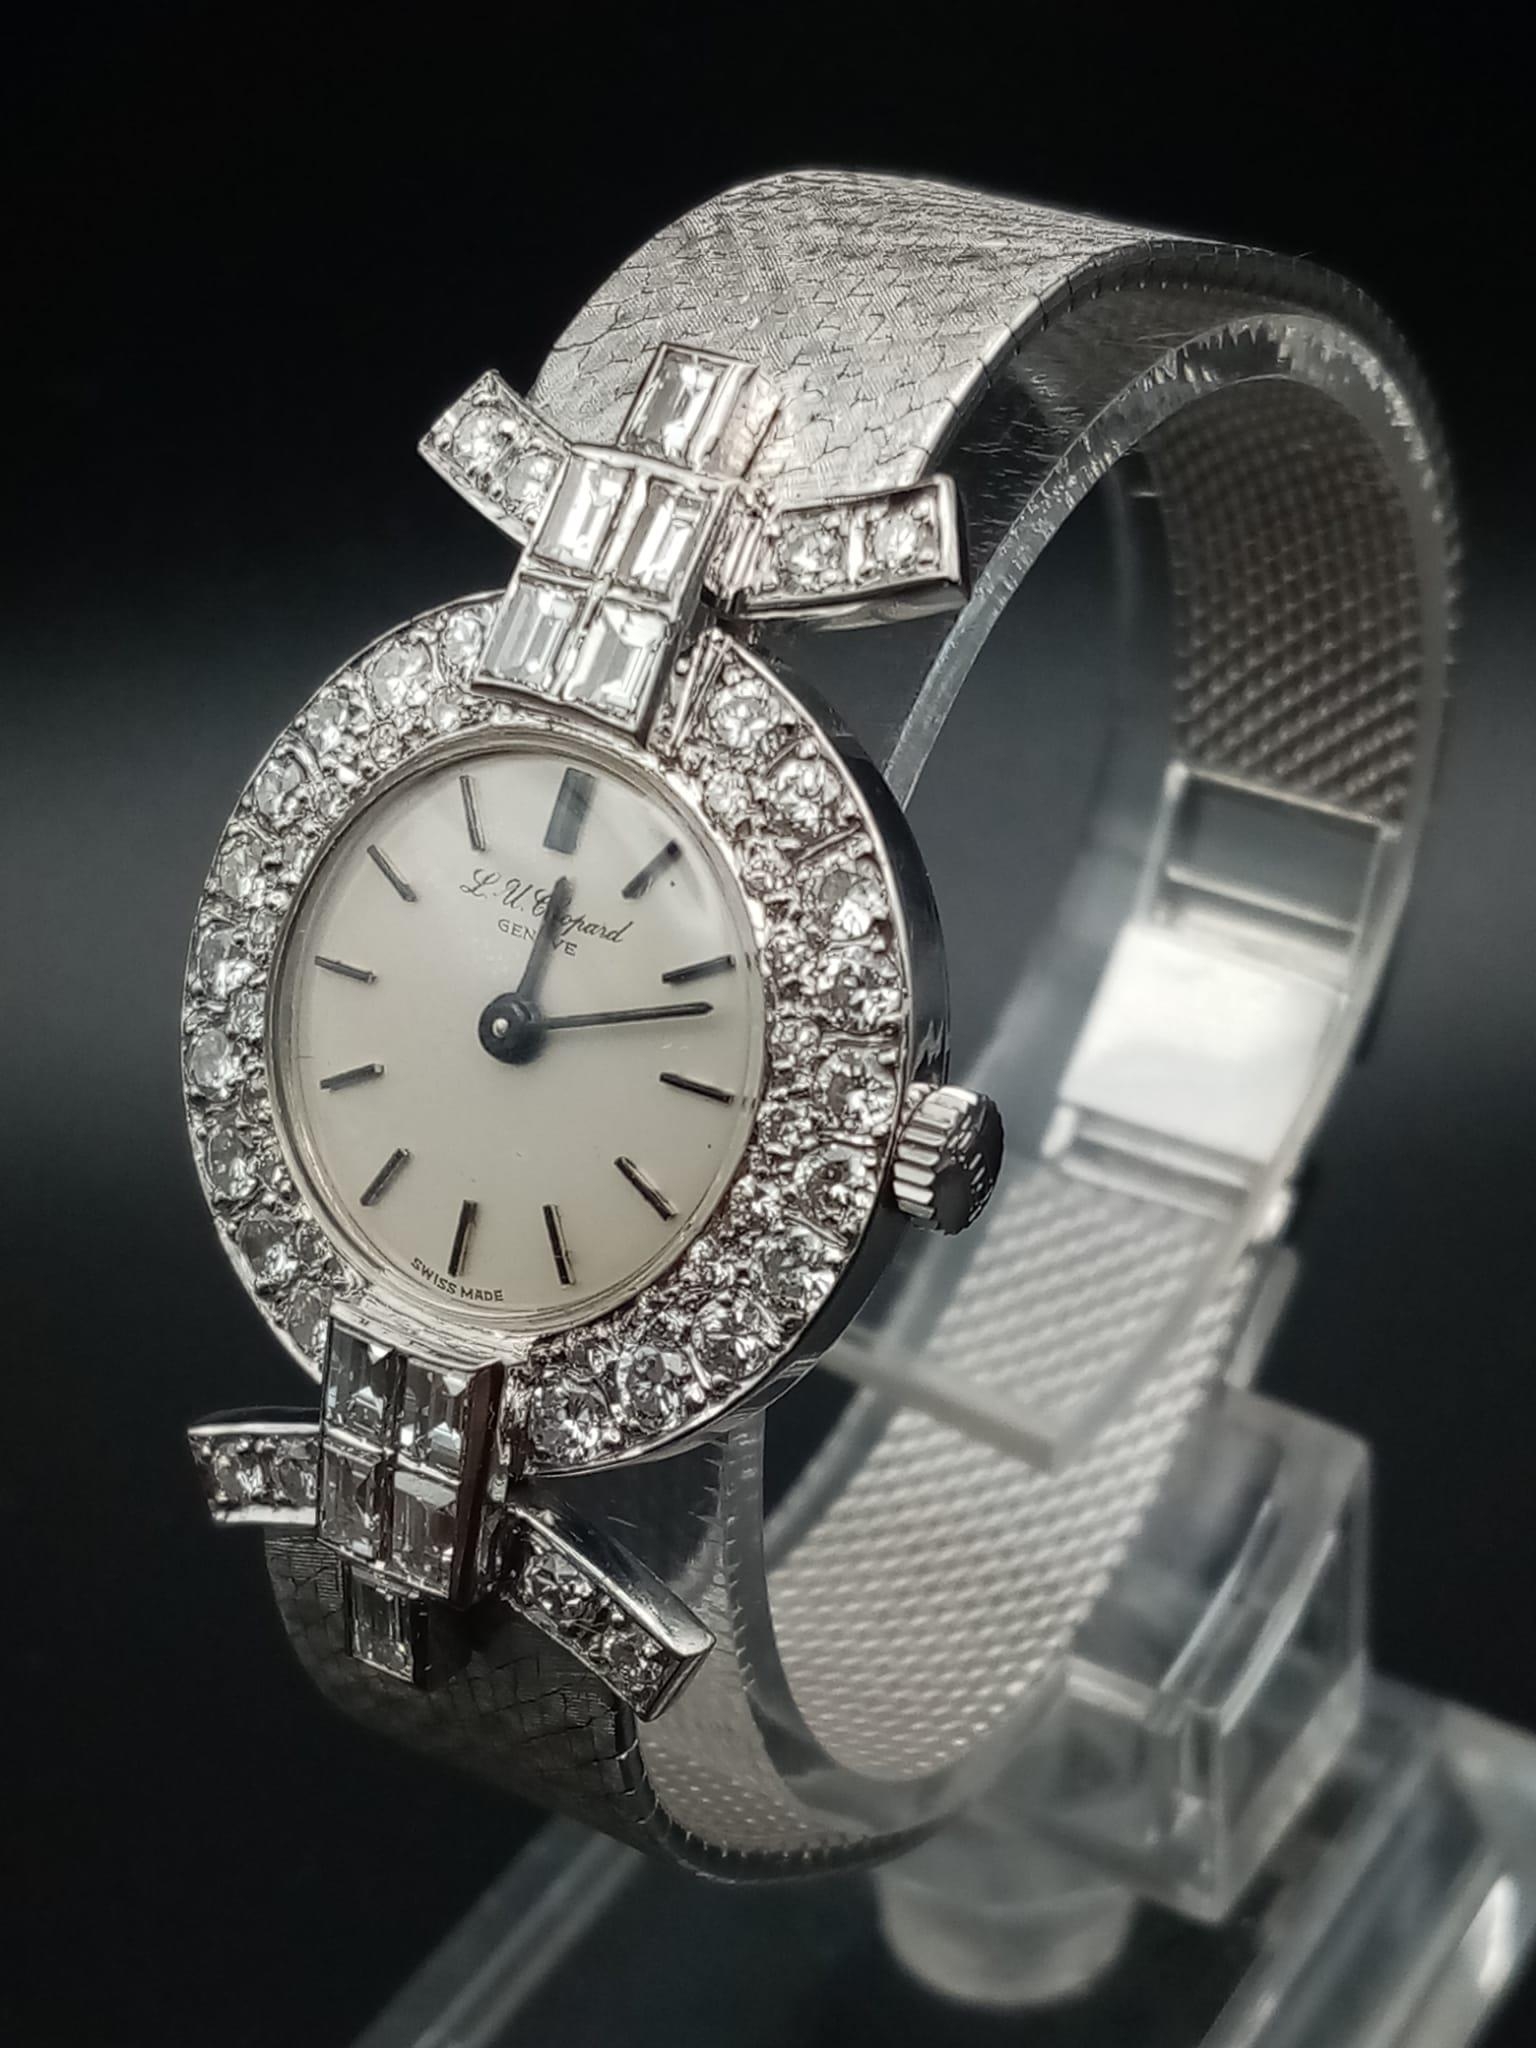 A Chopard 18K White Gold and Diamond Ladies Watch. White gold strap and case - 25mm diameter. - Image 2 of 10